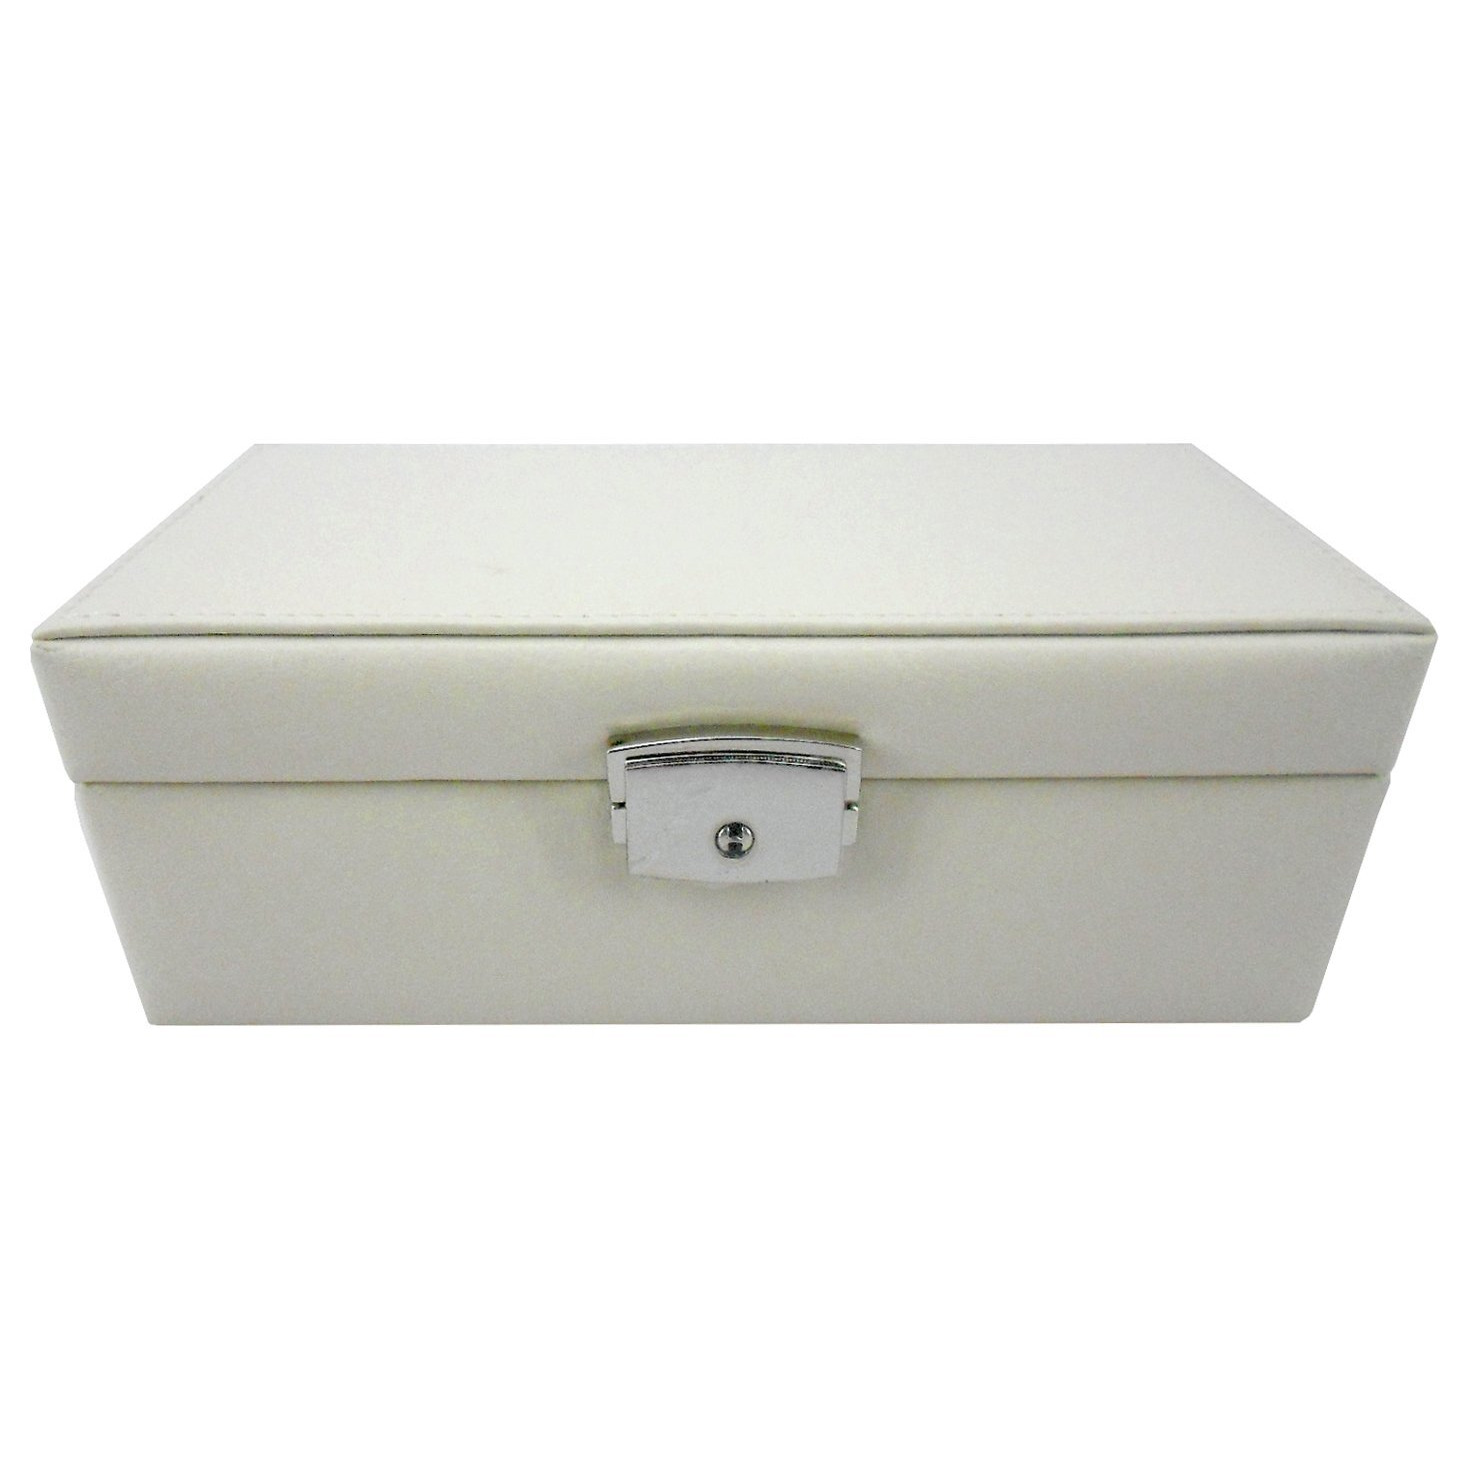 Cream Faux Leather Jewellery Box with Lock - image 1